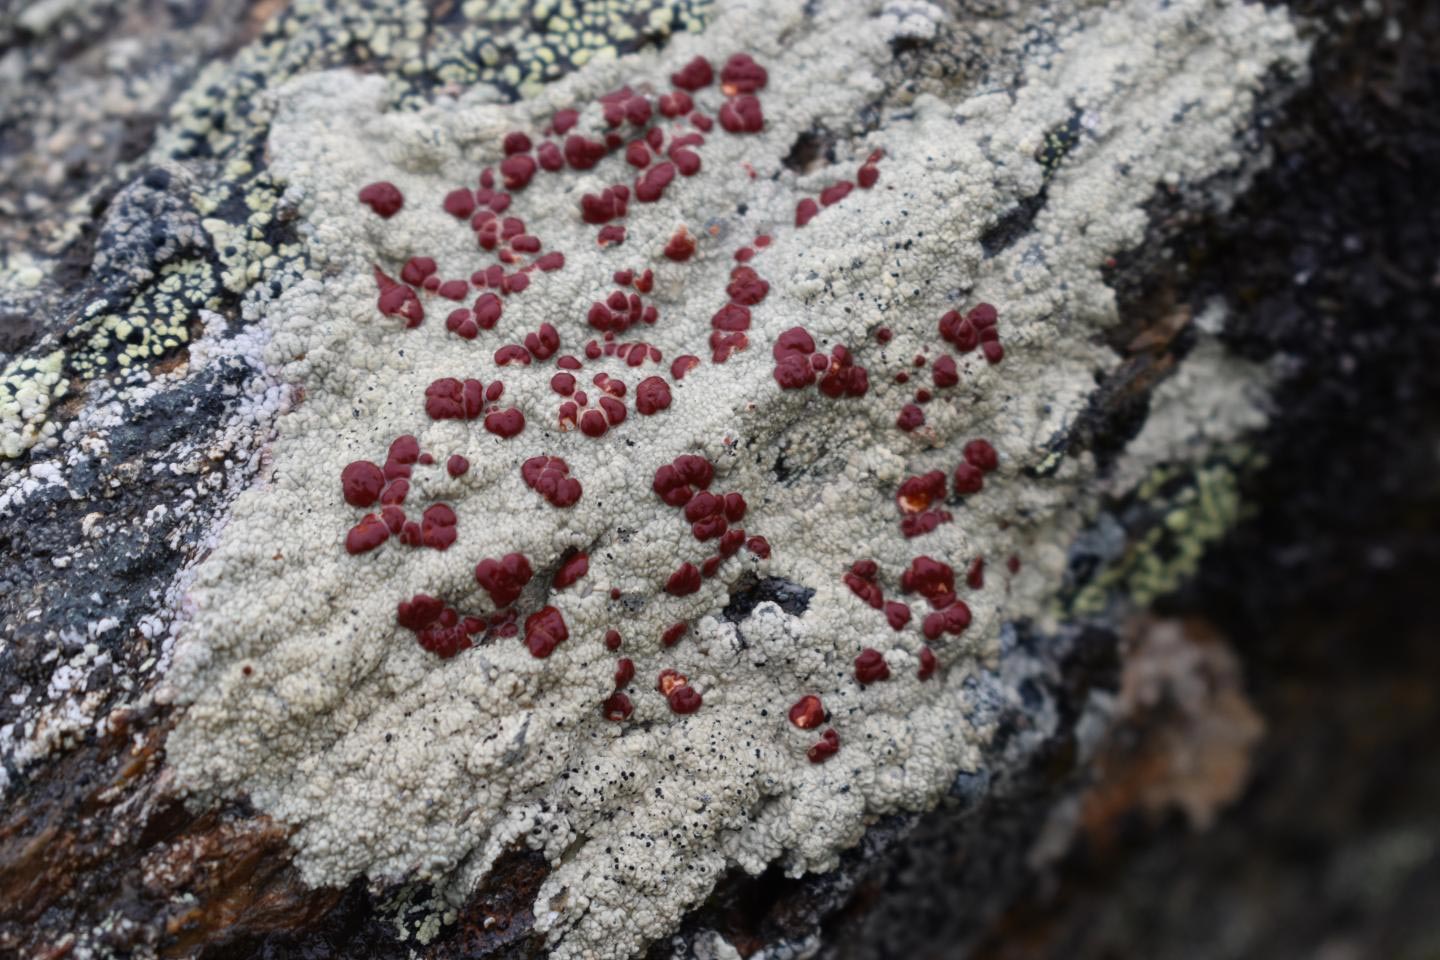 Lichens Are Way Younger Than Scientists Thought – Likely Evolved Millions of Years After Plants